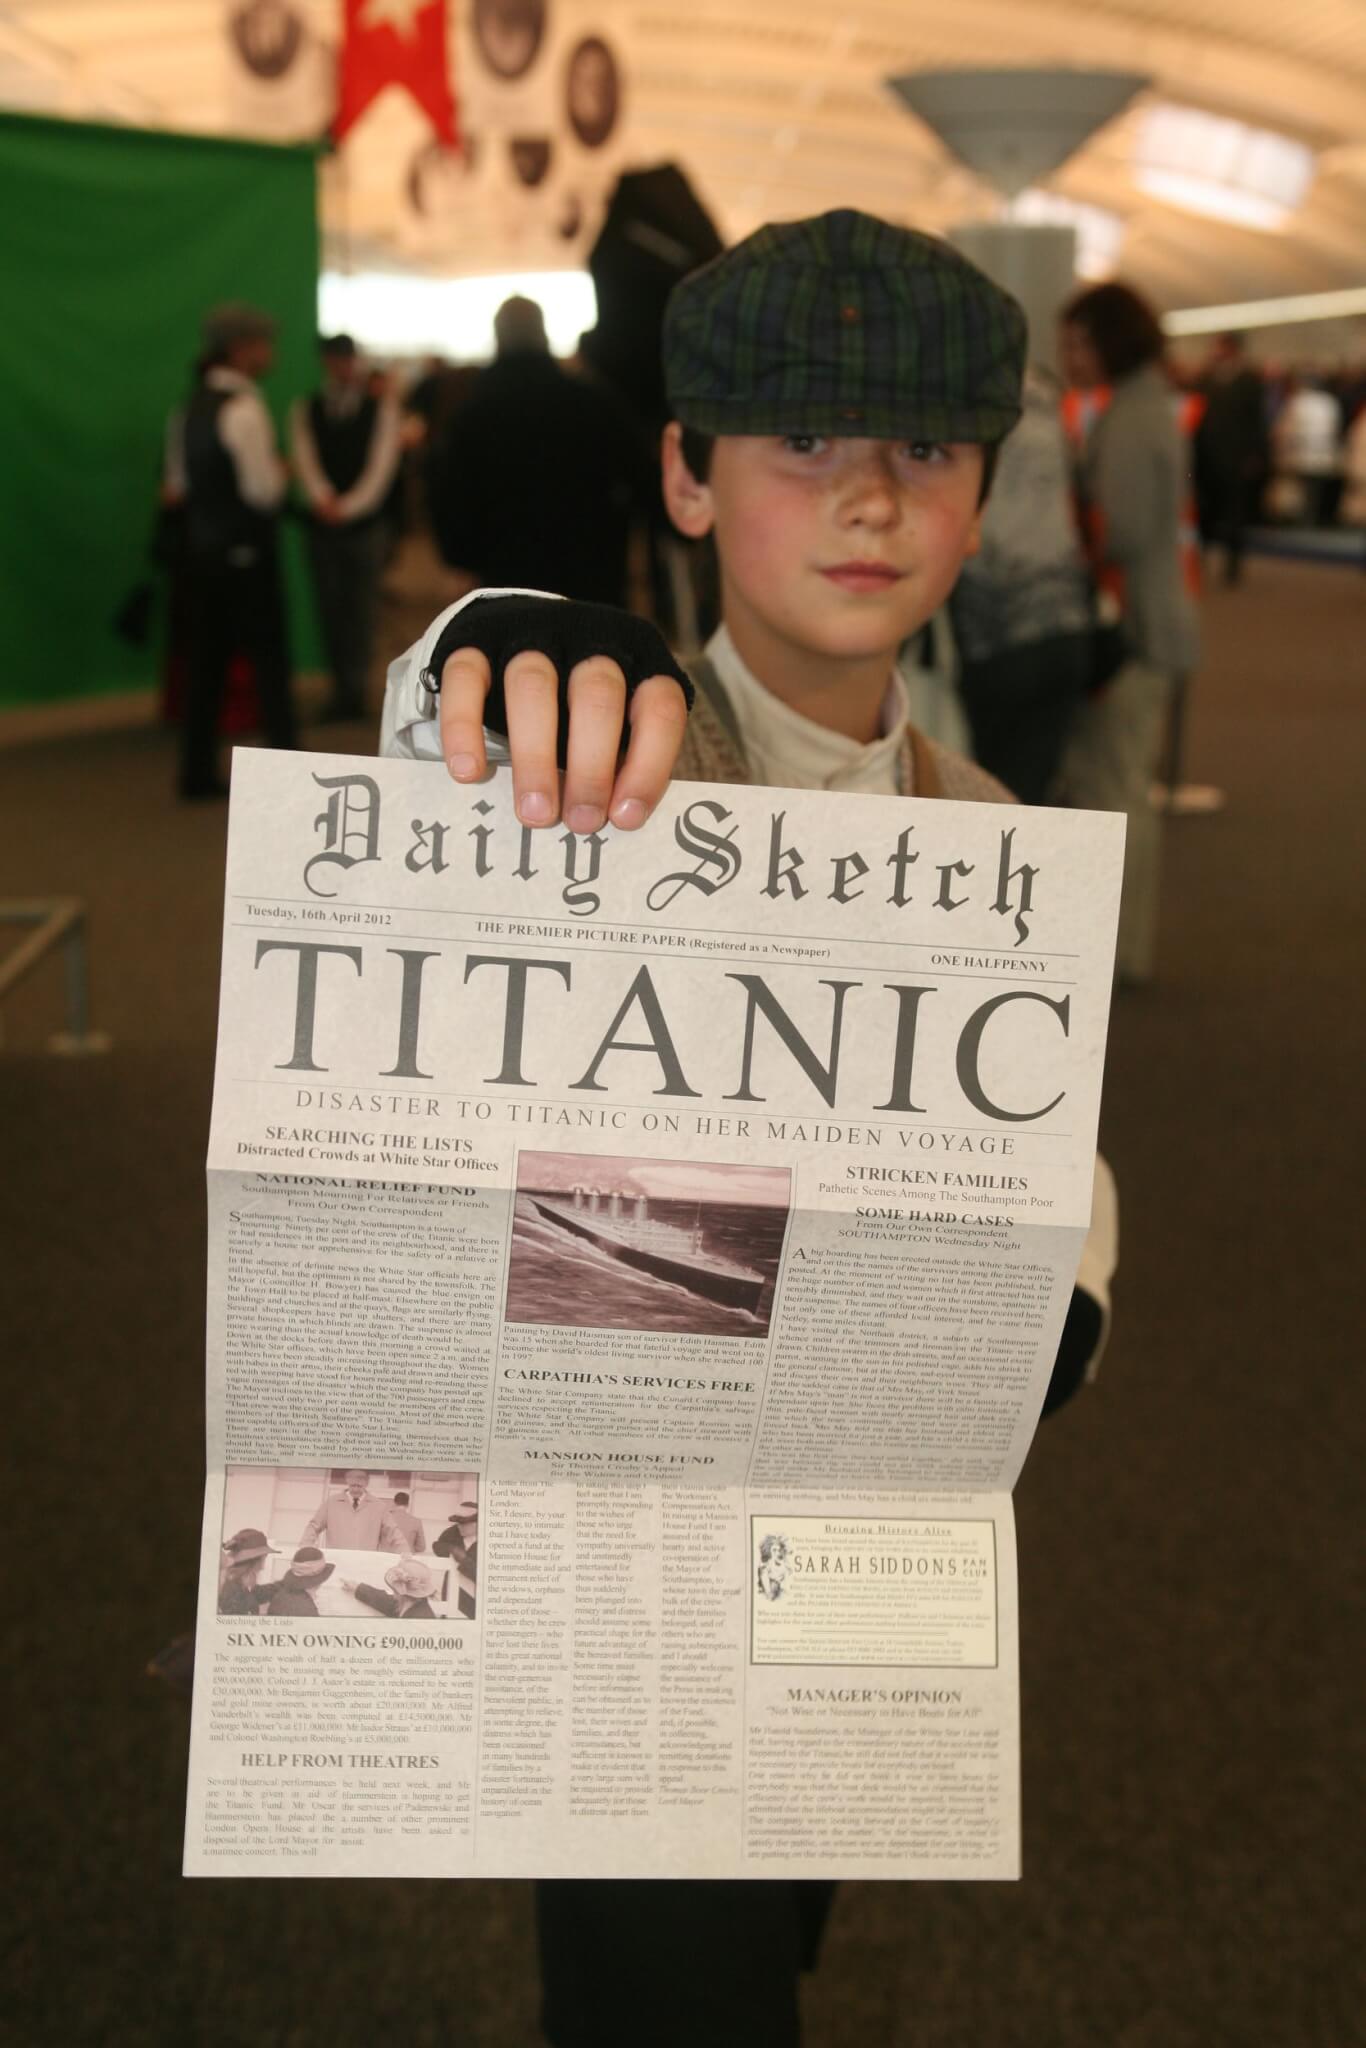 A boy in period costume handing out memorial newspaper in the departure lounge